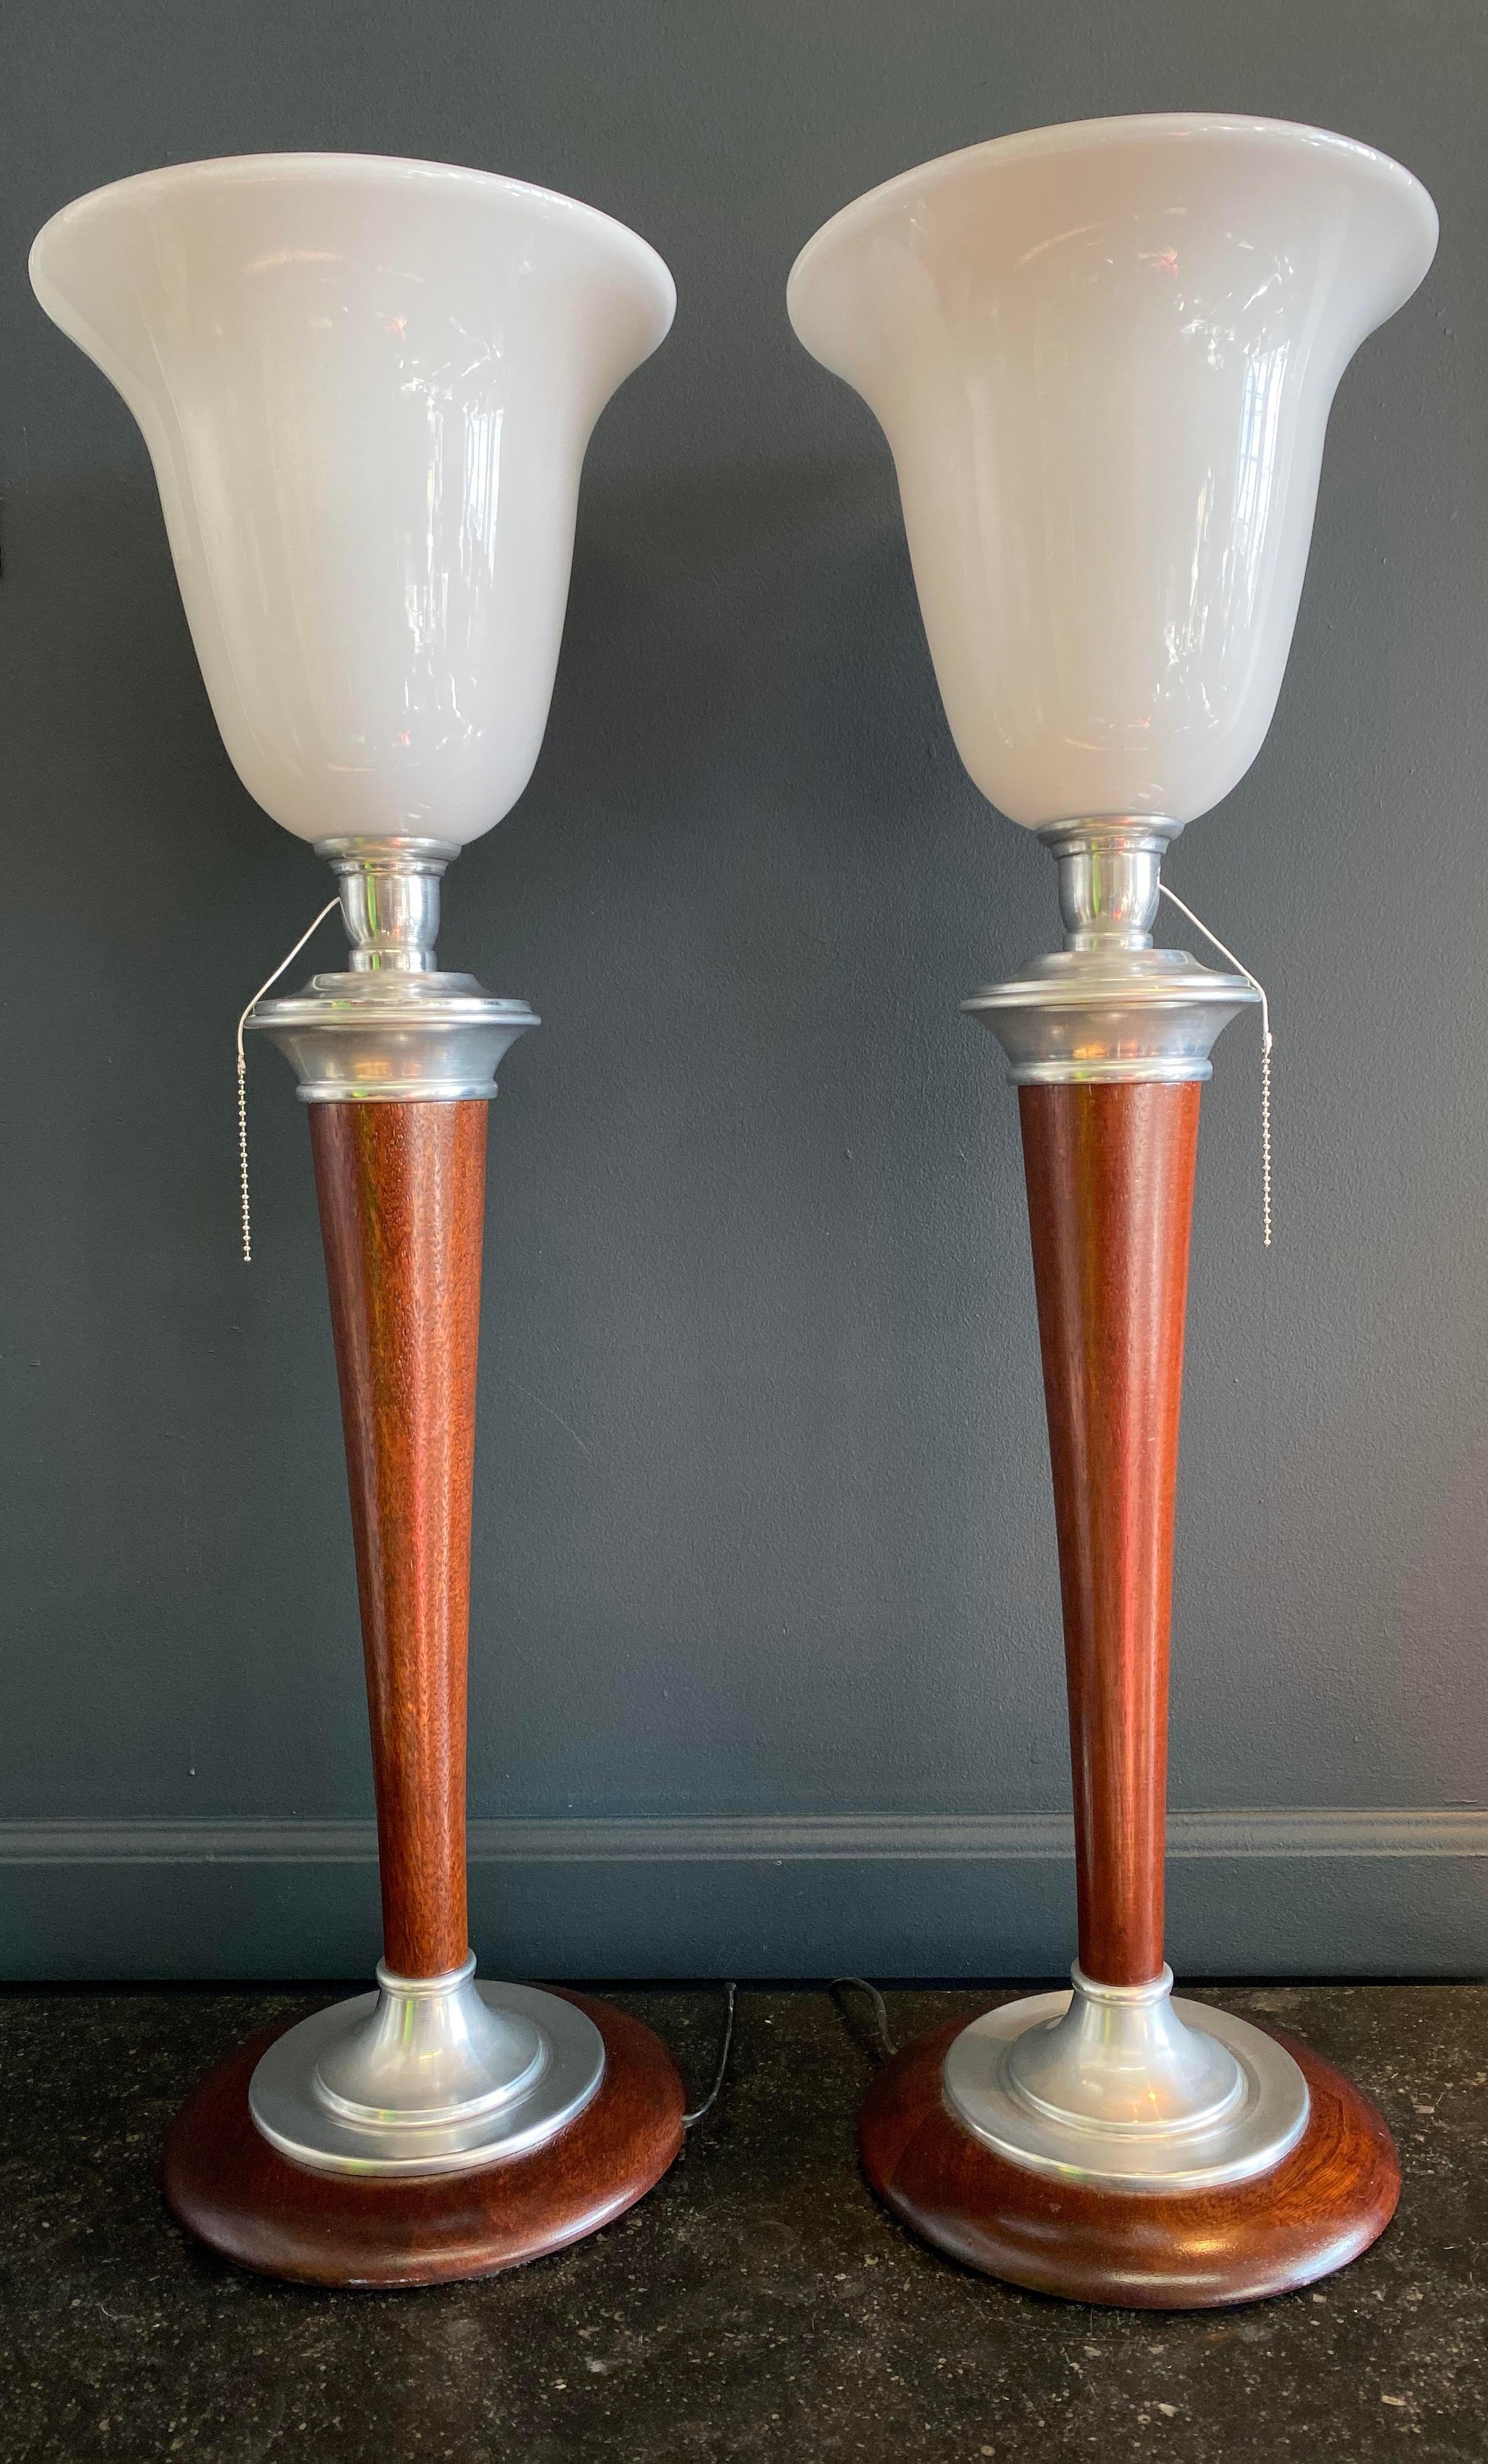 Pair of rare 1930s Art Deco Mazda lamps with original Mazda Lamps Factory stamp. Made in France. They feature an opaque (Opaline) glass shade with chrome detailing and restored mahogany wood.

Made in France. Authentic 1930. Restored and